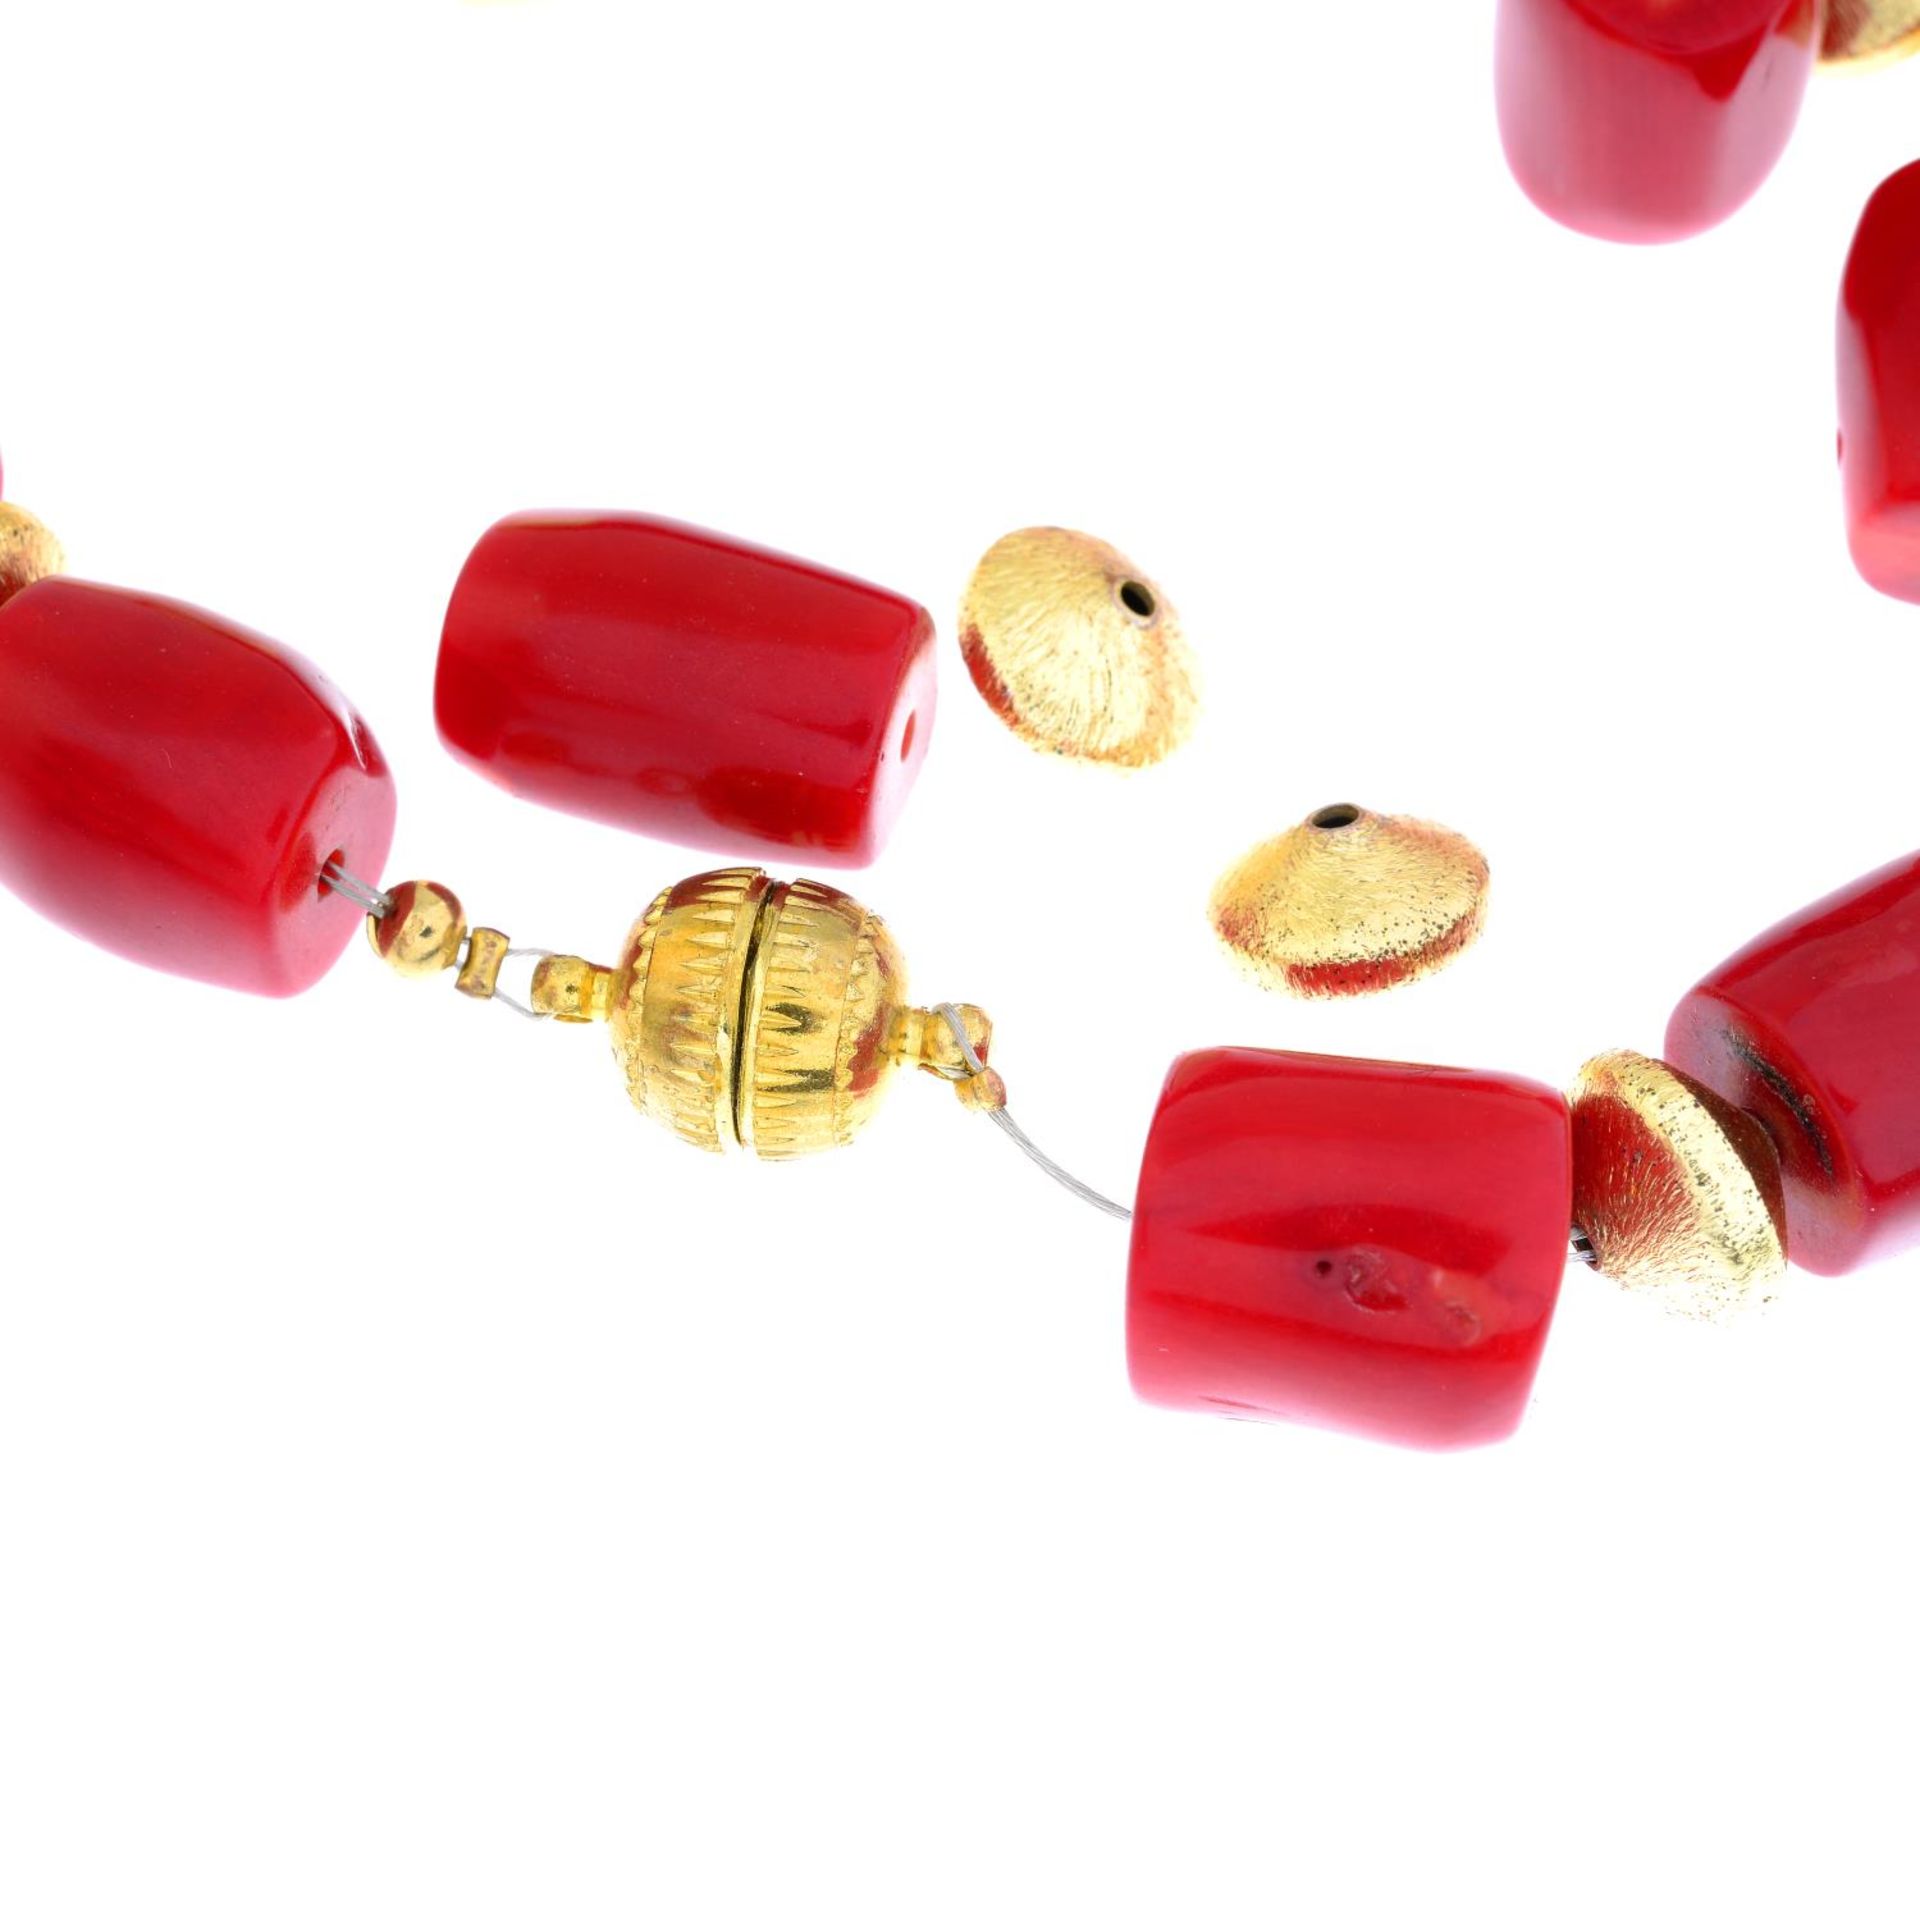 A stem coral necklace with bead spacers. - Image 2 of 2